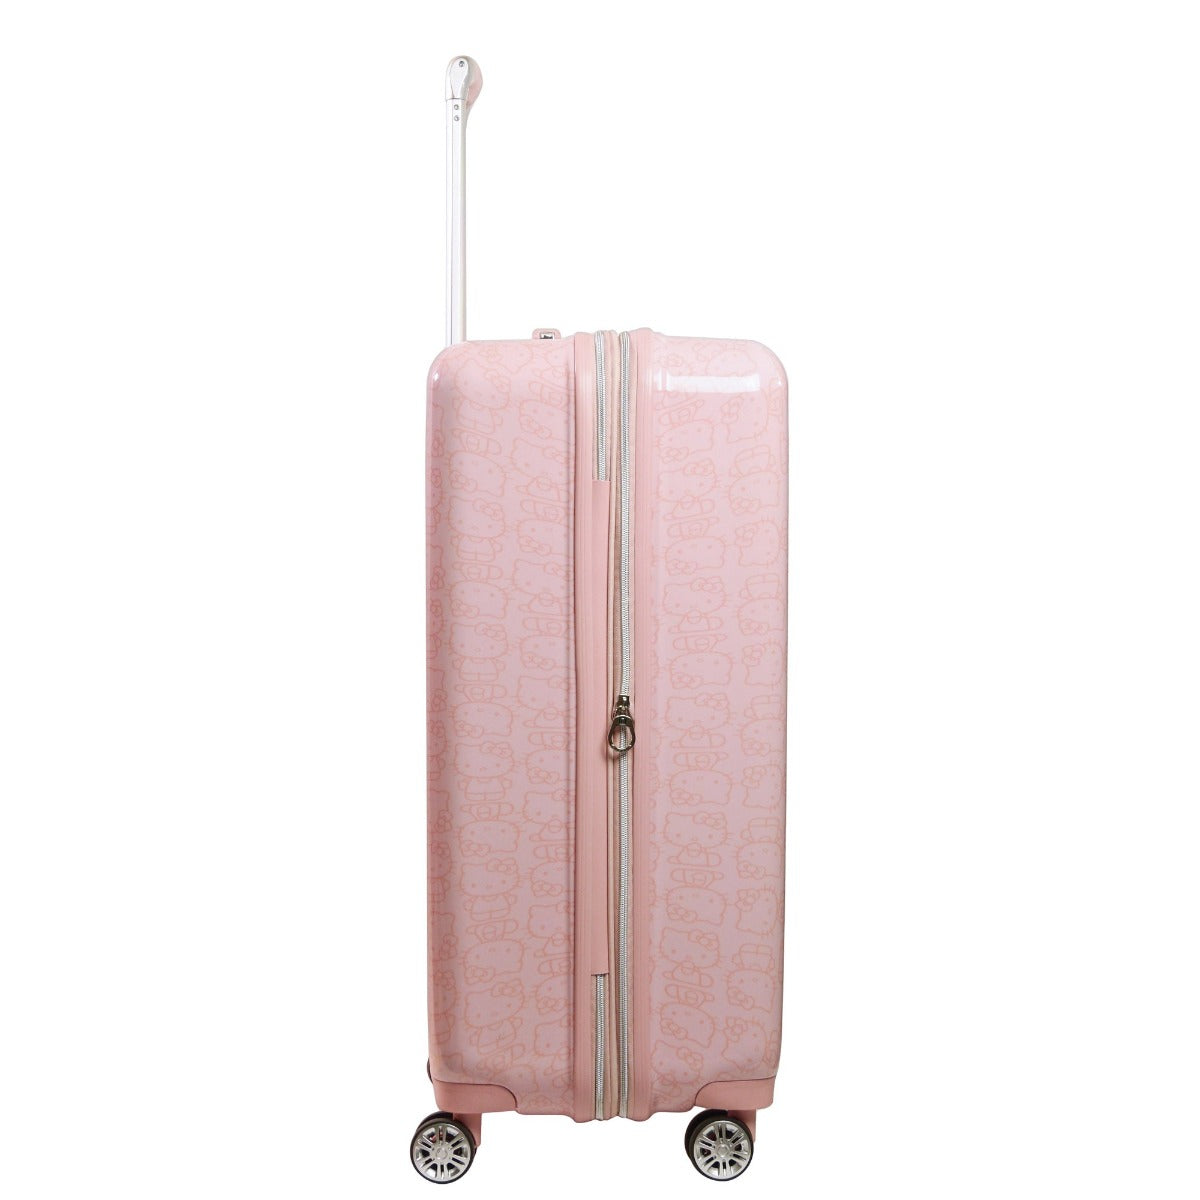 Hello Kitty Pose All Over Print 29.5 inch Hard-Sided Luggage Pink checked spinner suticase